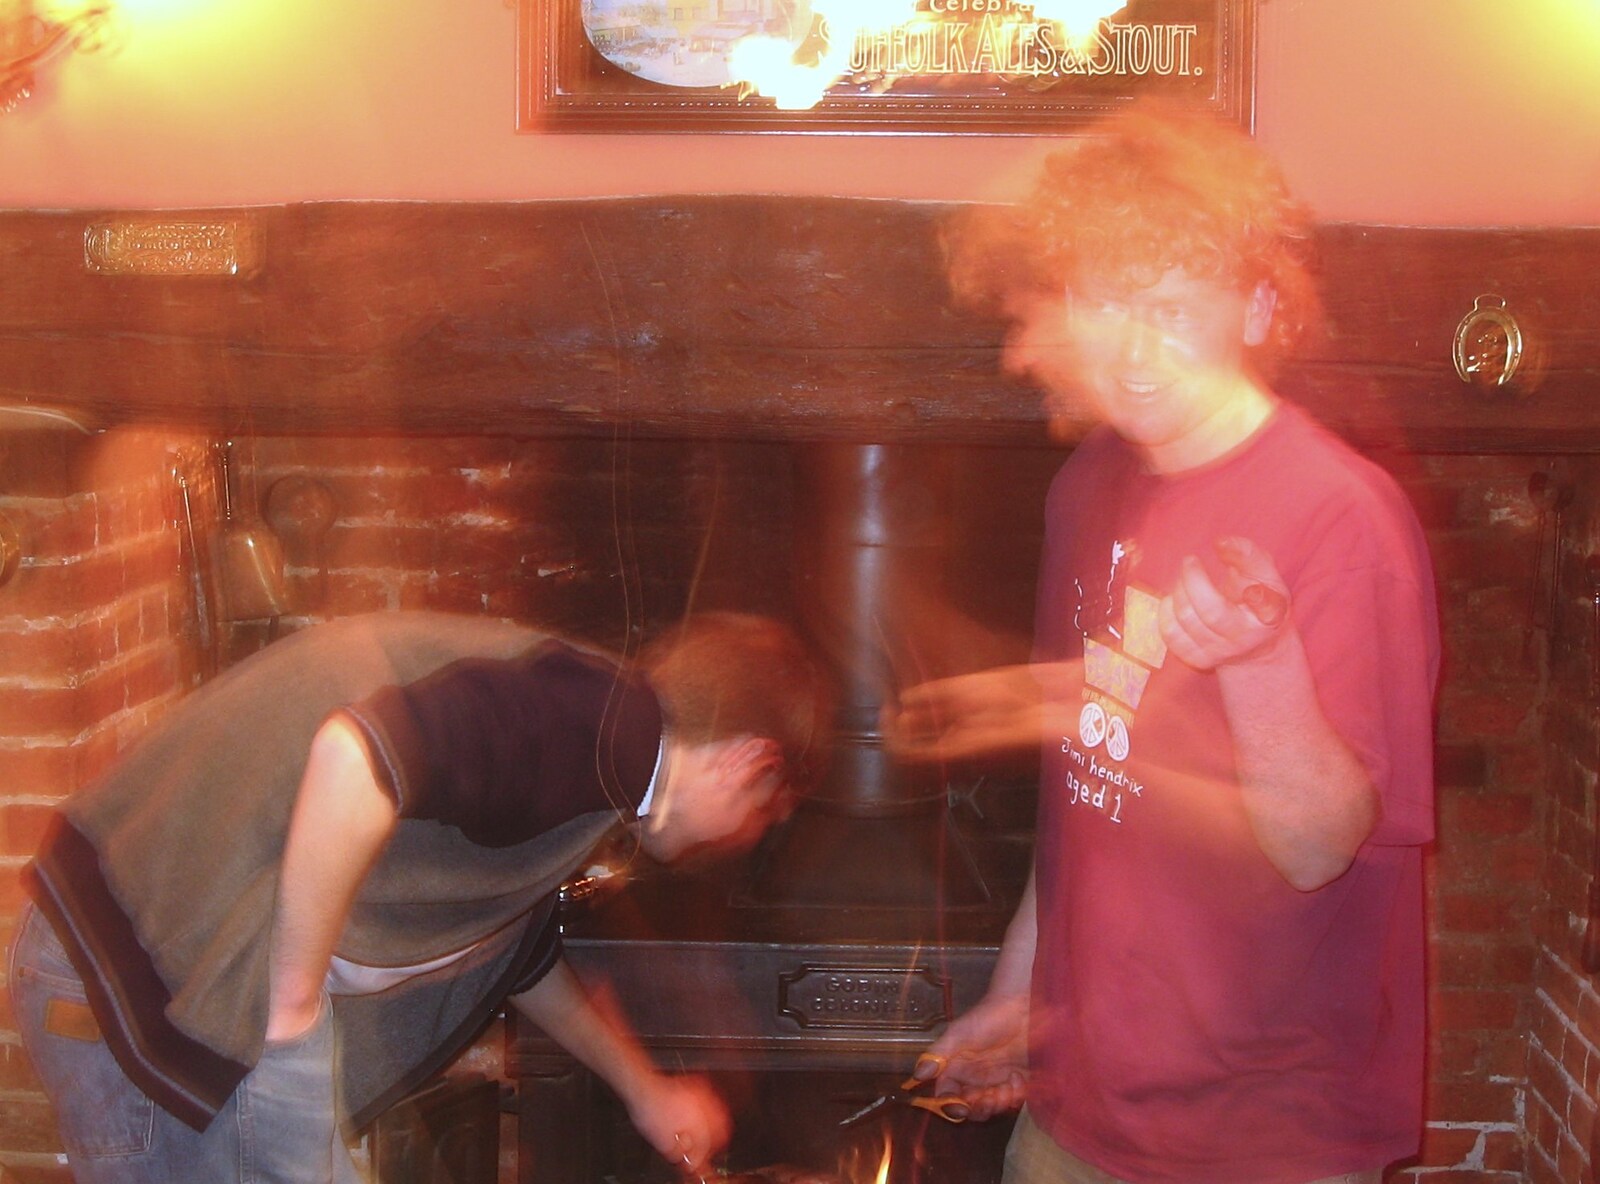 Sausages at the Swan and Revs Gets Decorated, Diss and Brome, Norfolk and Suffolk - 7th January 2005: An accidental blurry shot of Phil and Wavy